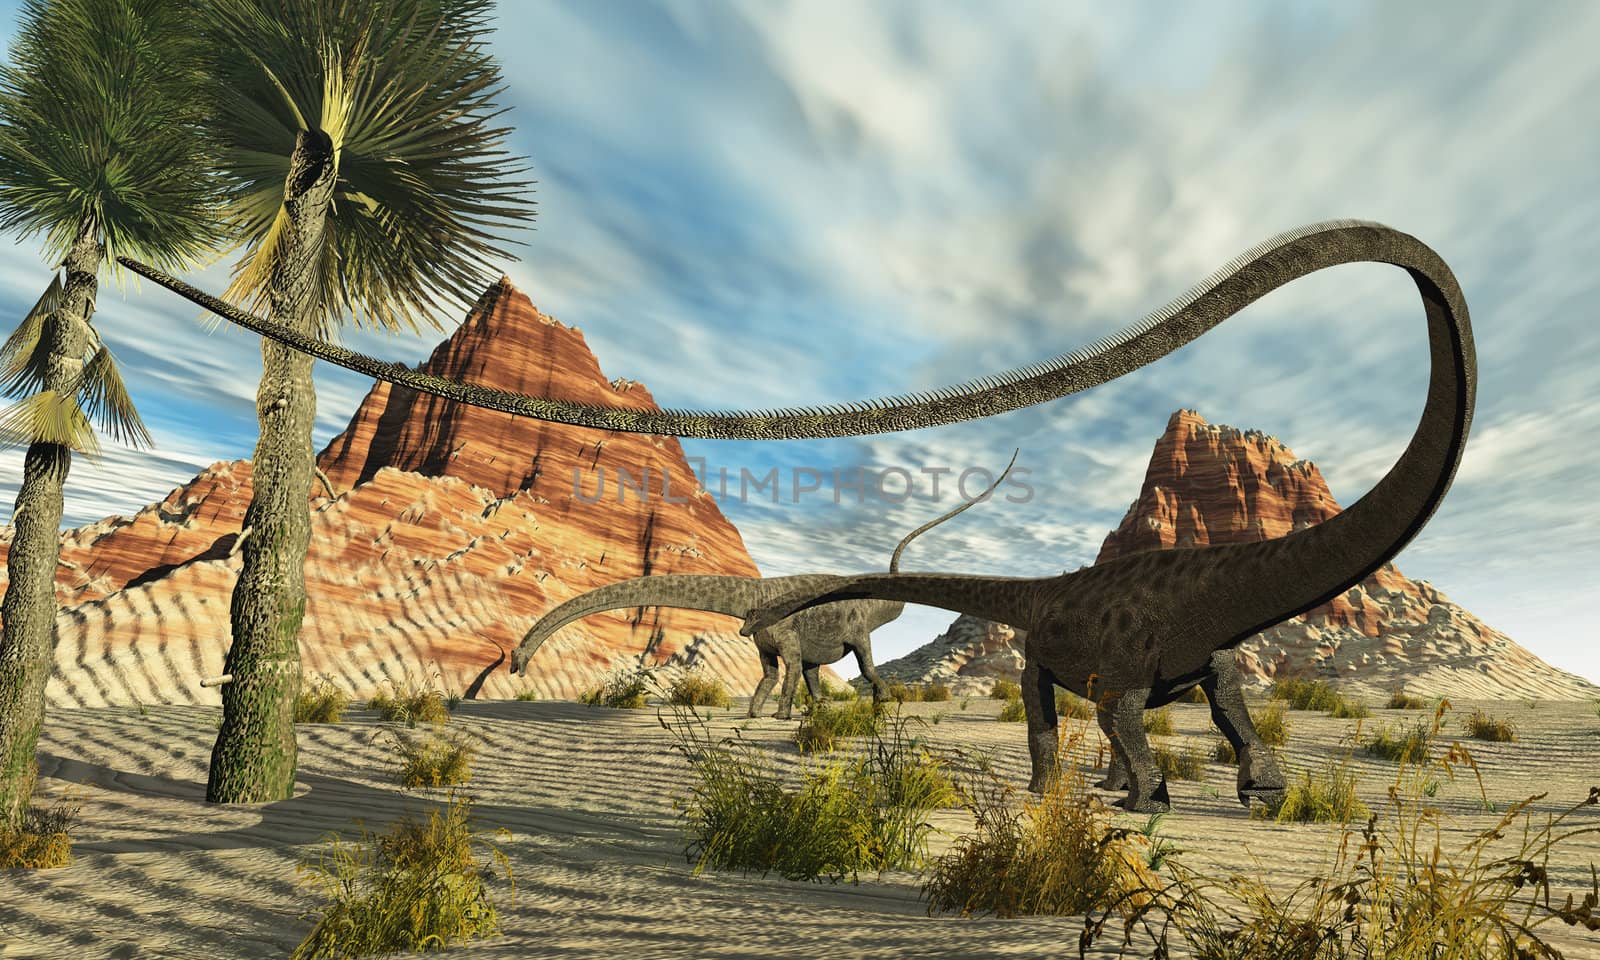 Two Diplodocus dinosaurs search for food in a desert landscape.